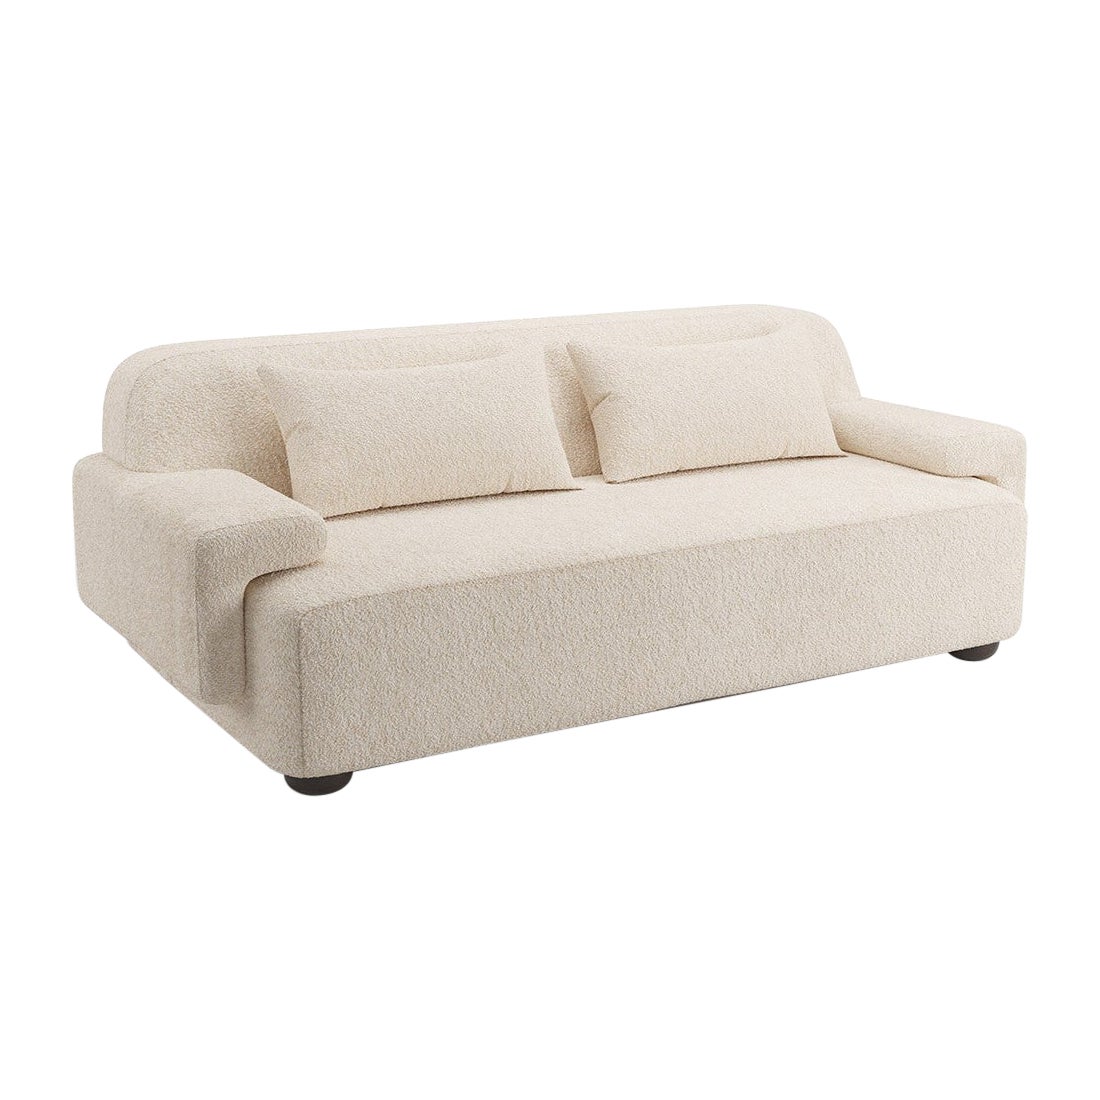 Popus Editions Lena 3 Seater Sofa in Natural Athena Loop Yarn Upholstery For Sale